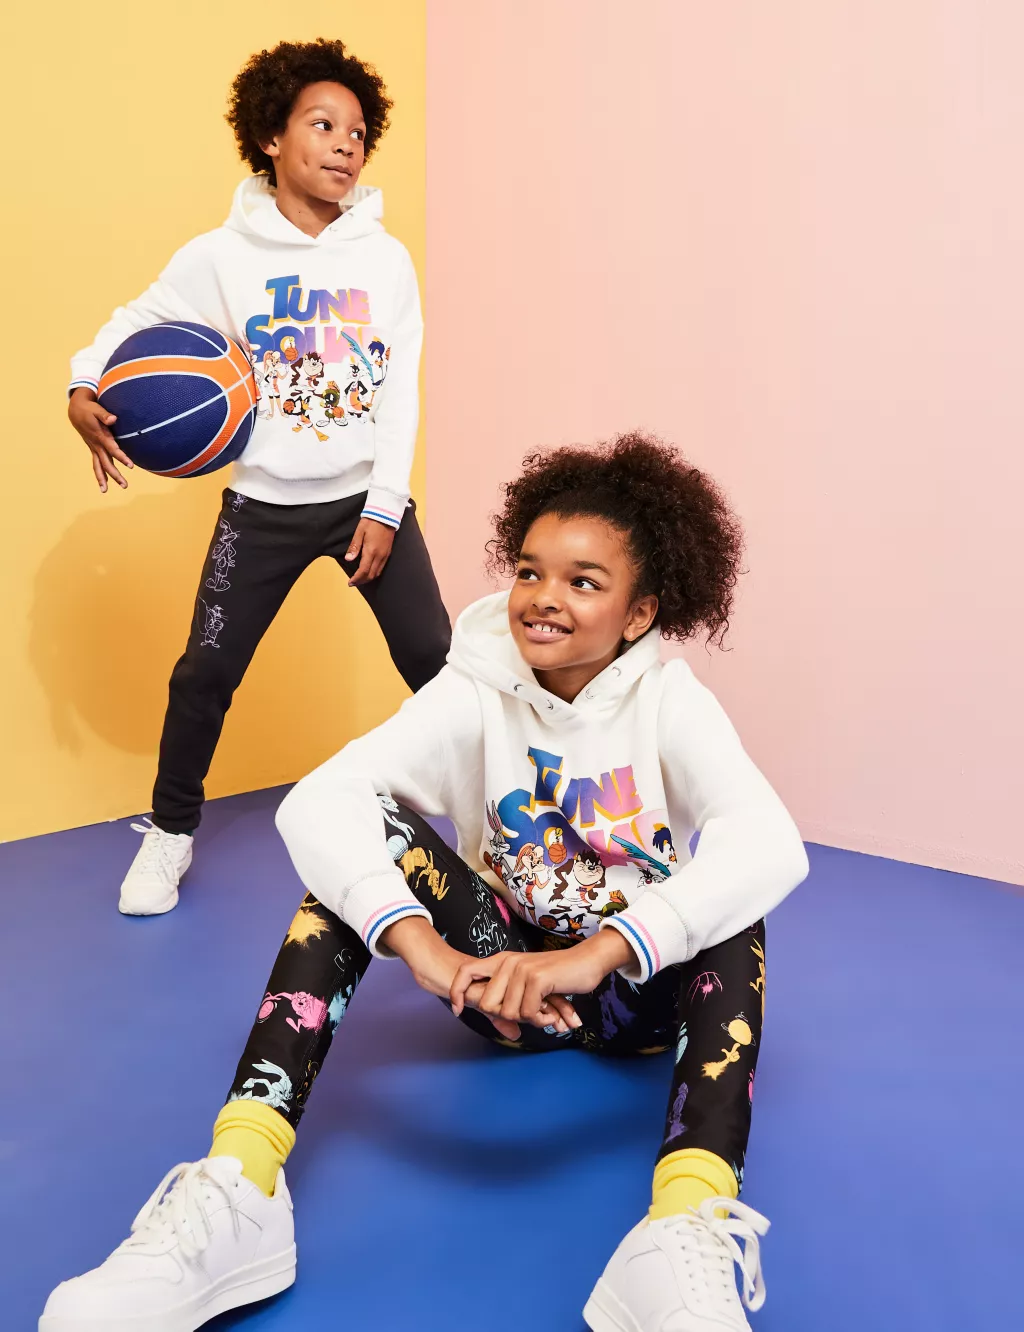 Space Jam: A New Legacy™ Cotton Hoodie (6-16 Yrs) | M&S Collection | M&S